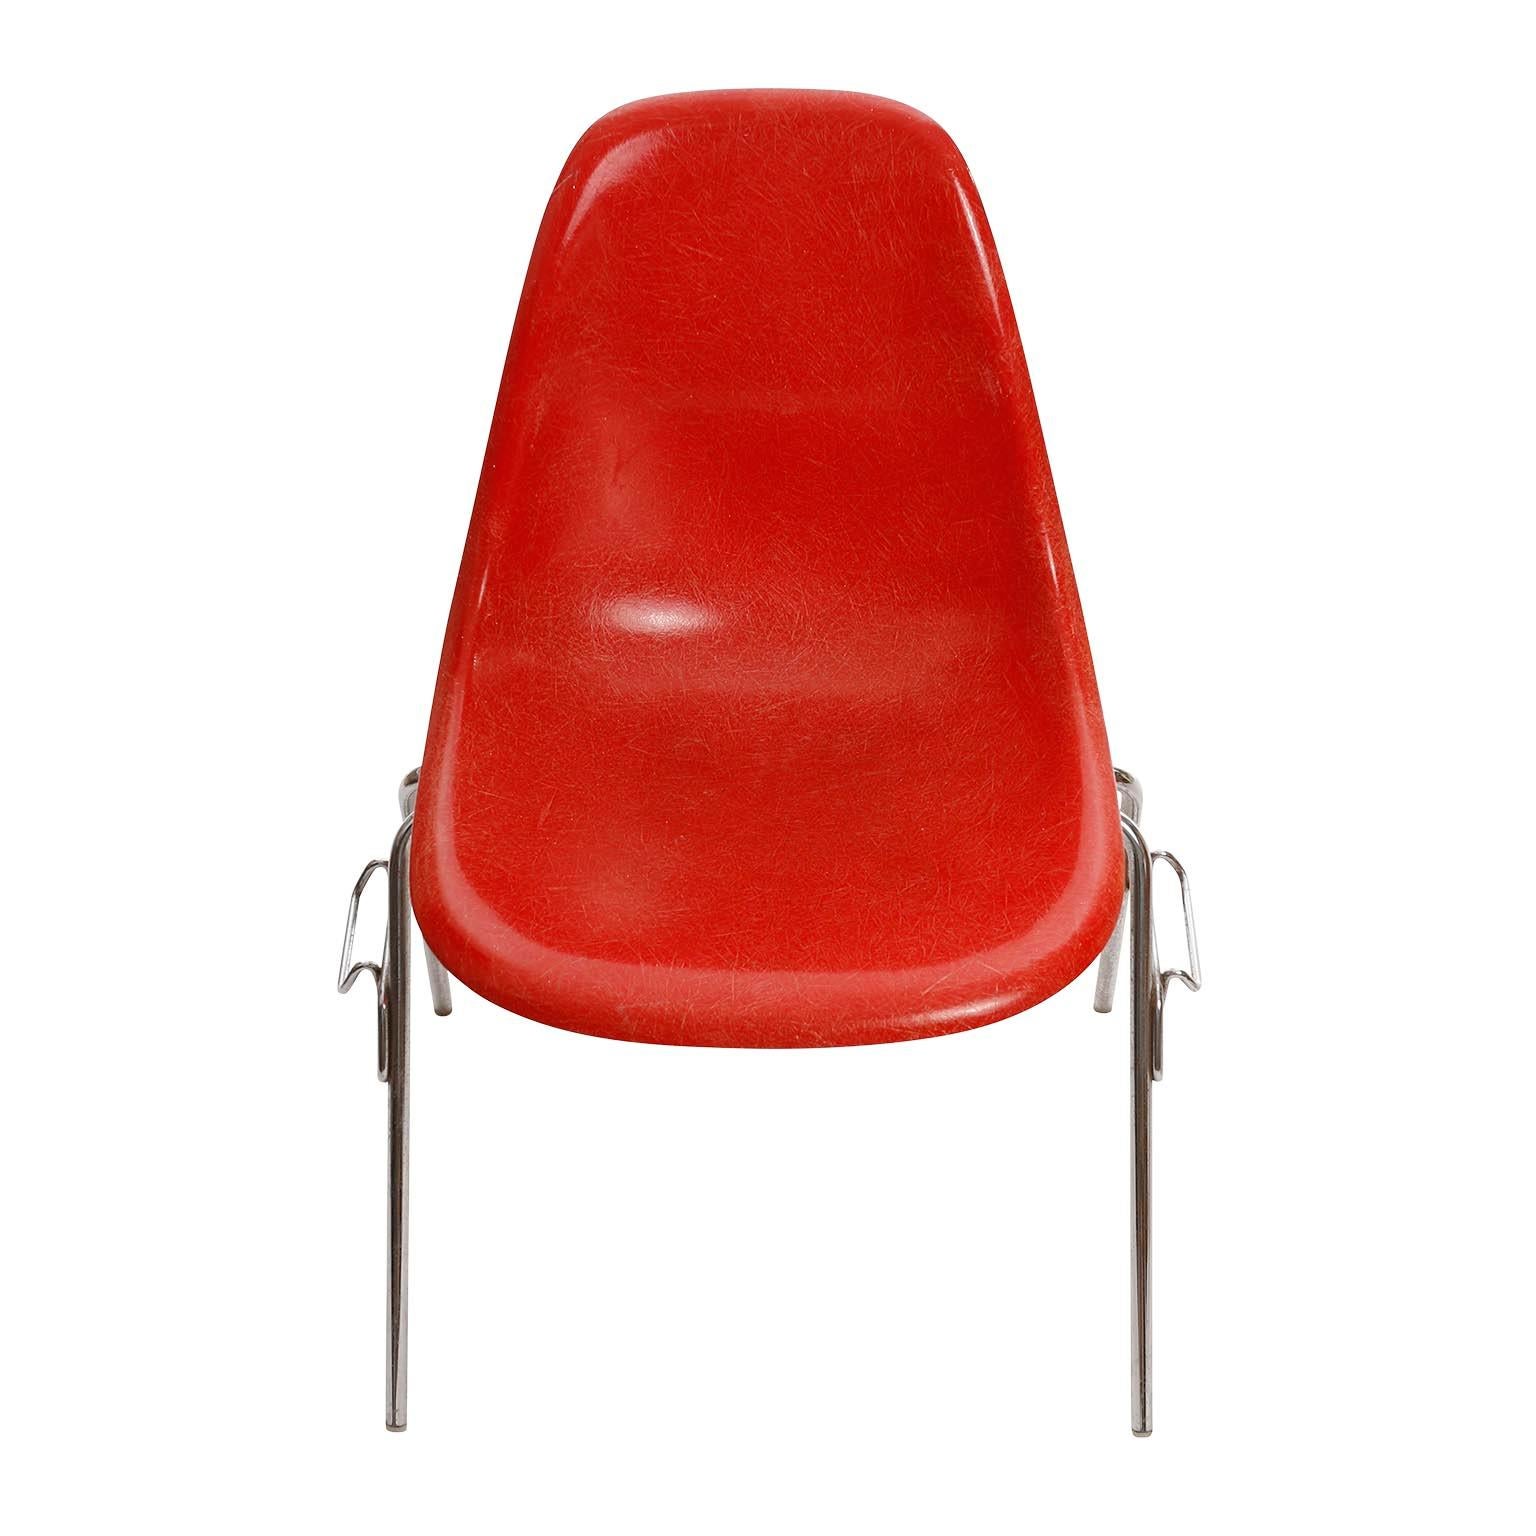 American Six Stacking Chairs, Charles & Ray Eames, Herman Miller, Red Fiberglass, 1974. For Sale